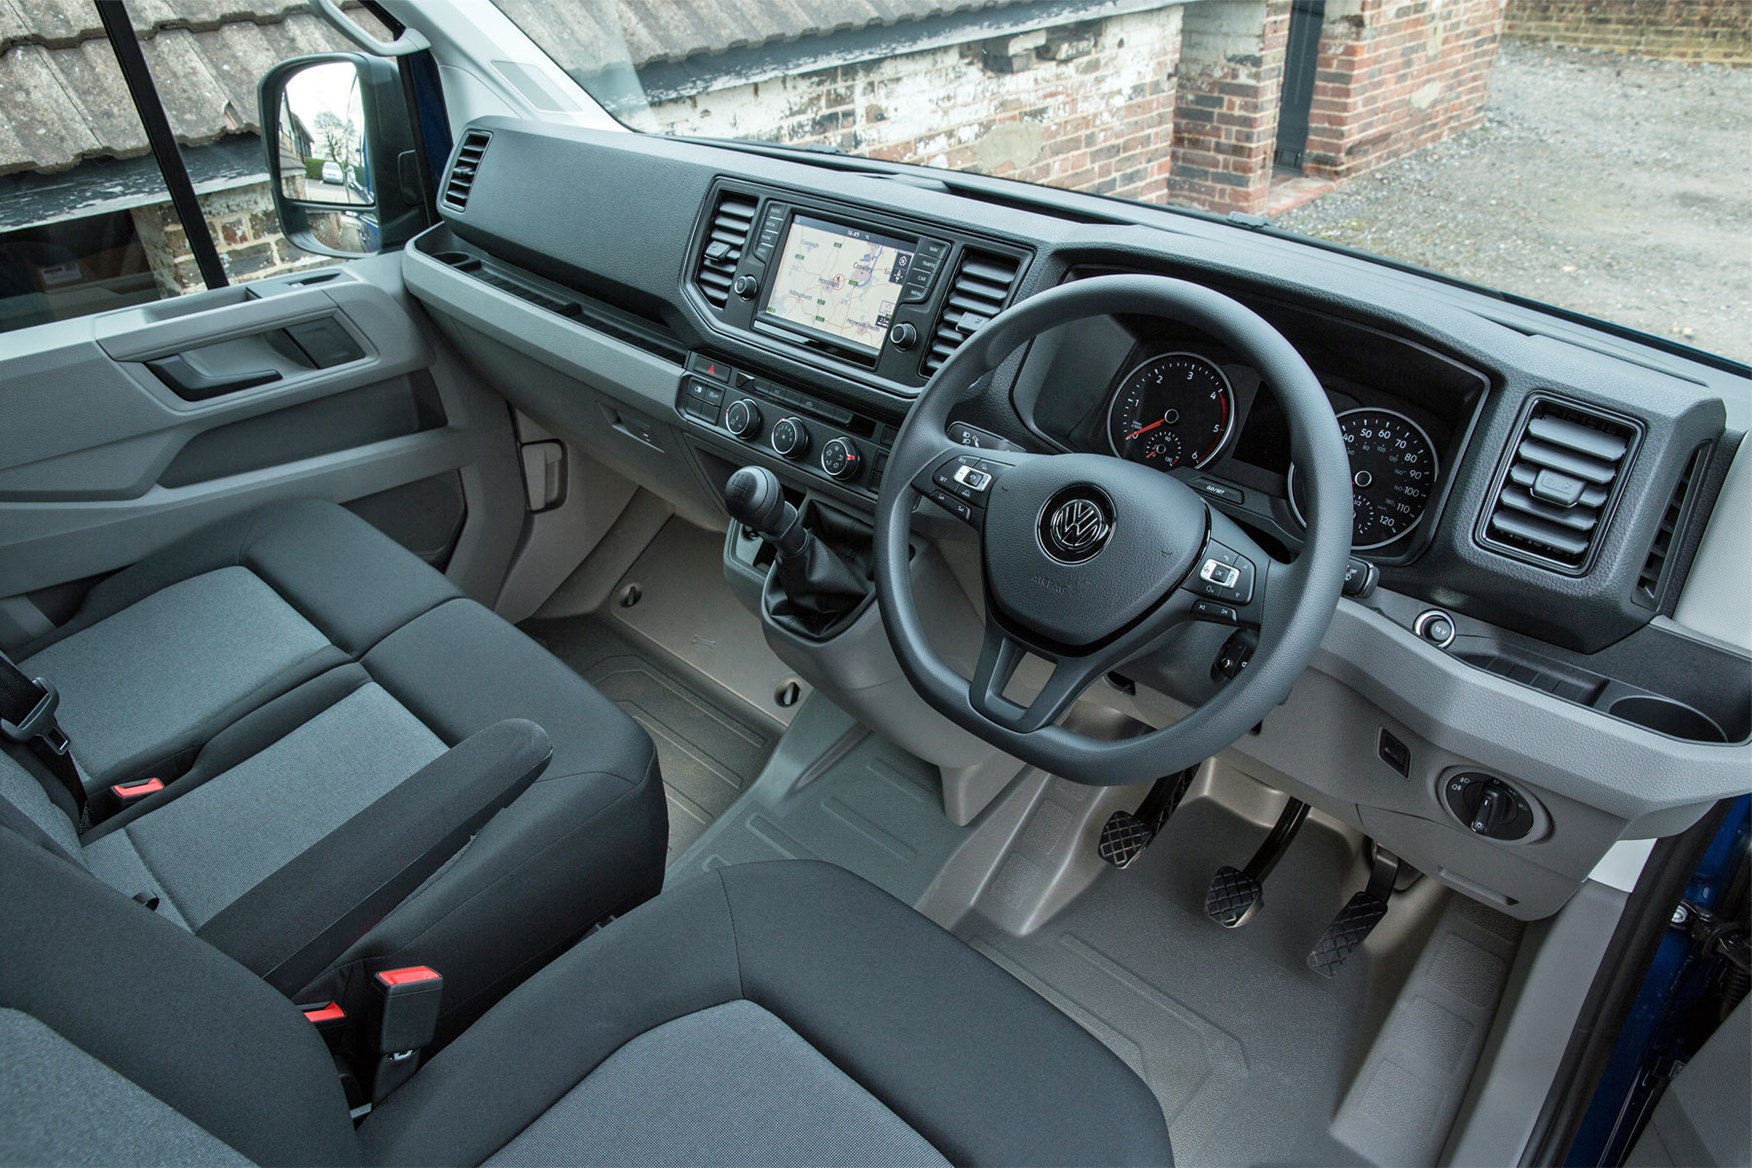 VW Crafter Review, For Sale, Colours, Specs, Interior & Models